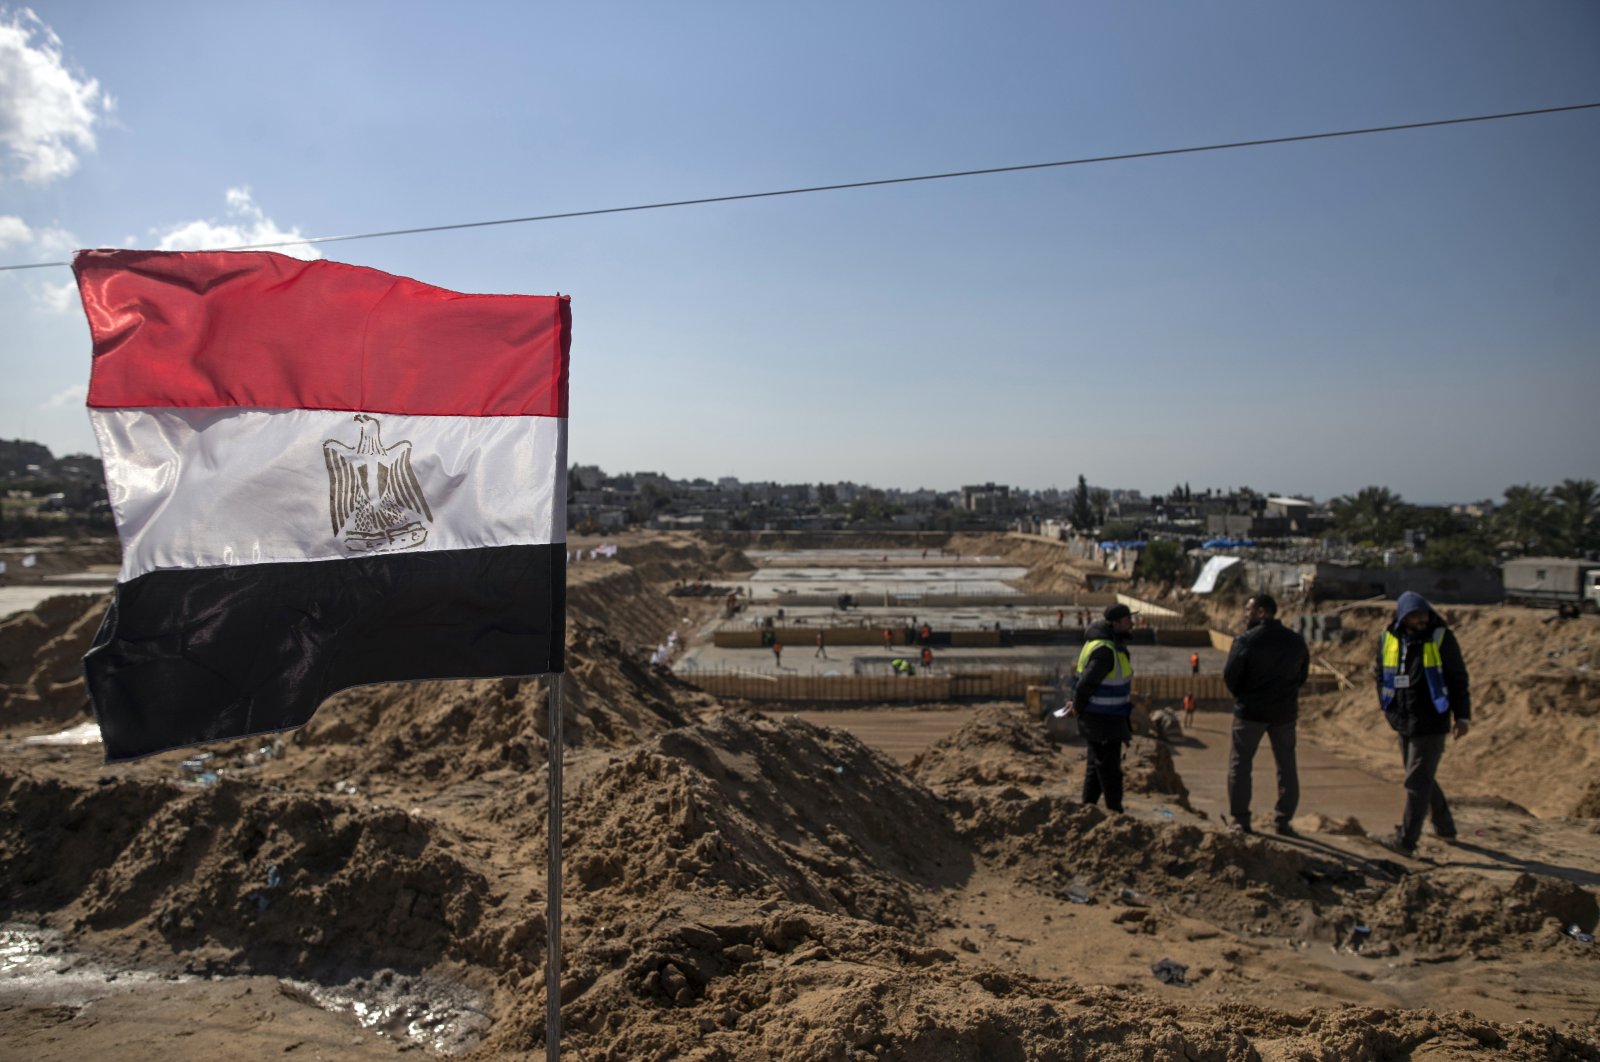 Laborers work on concrete slab foundations for one of three Egyptian-funded housing complexes in the Gaza Strip, in the town of Beit Lahiya, northern Gaza, Palestine, Jan. 25, 2022. (AP Photo)